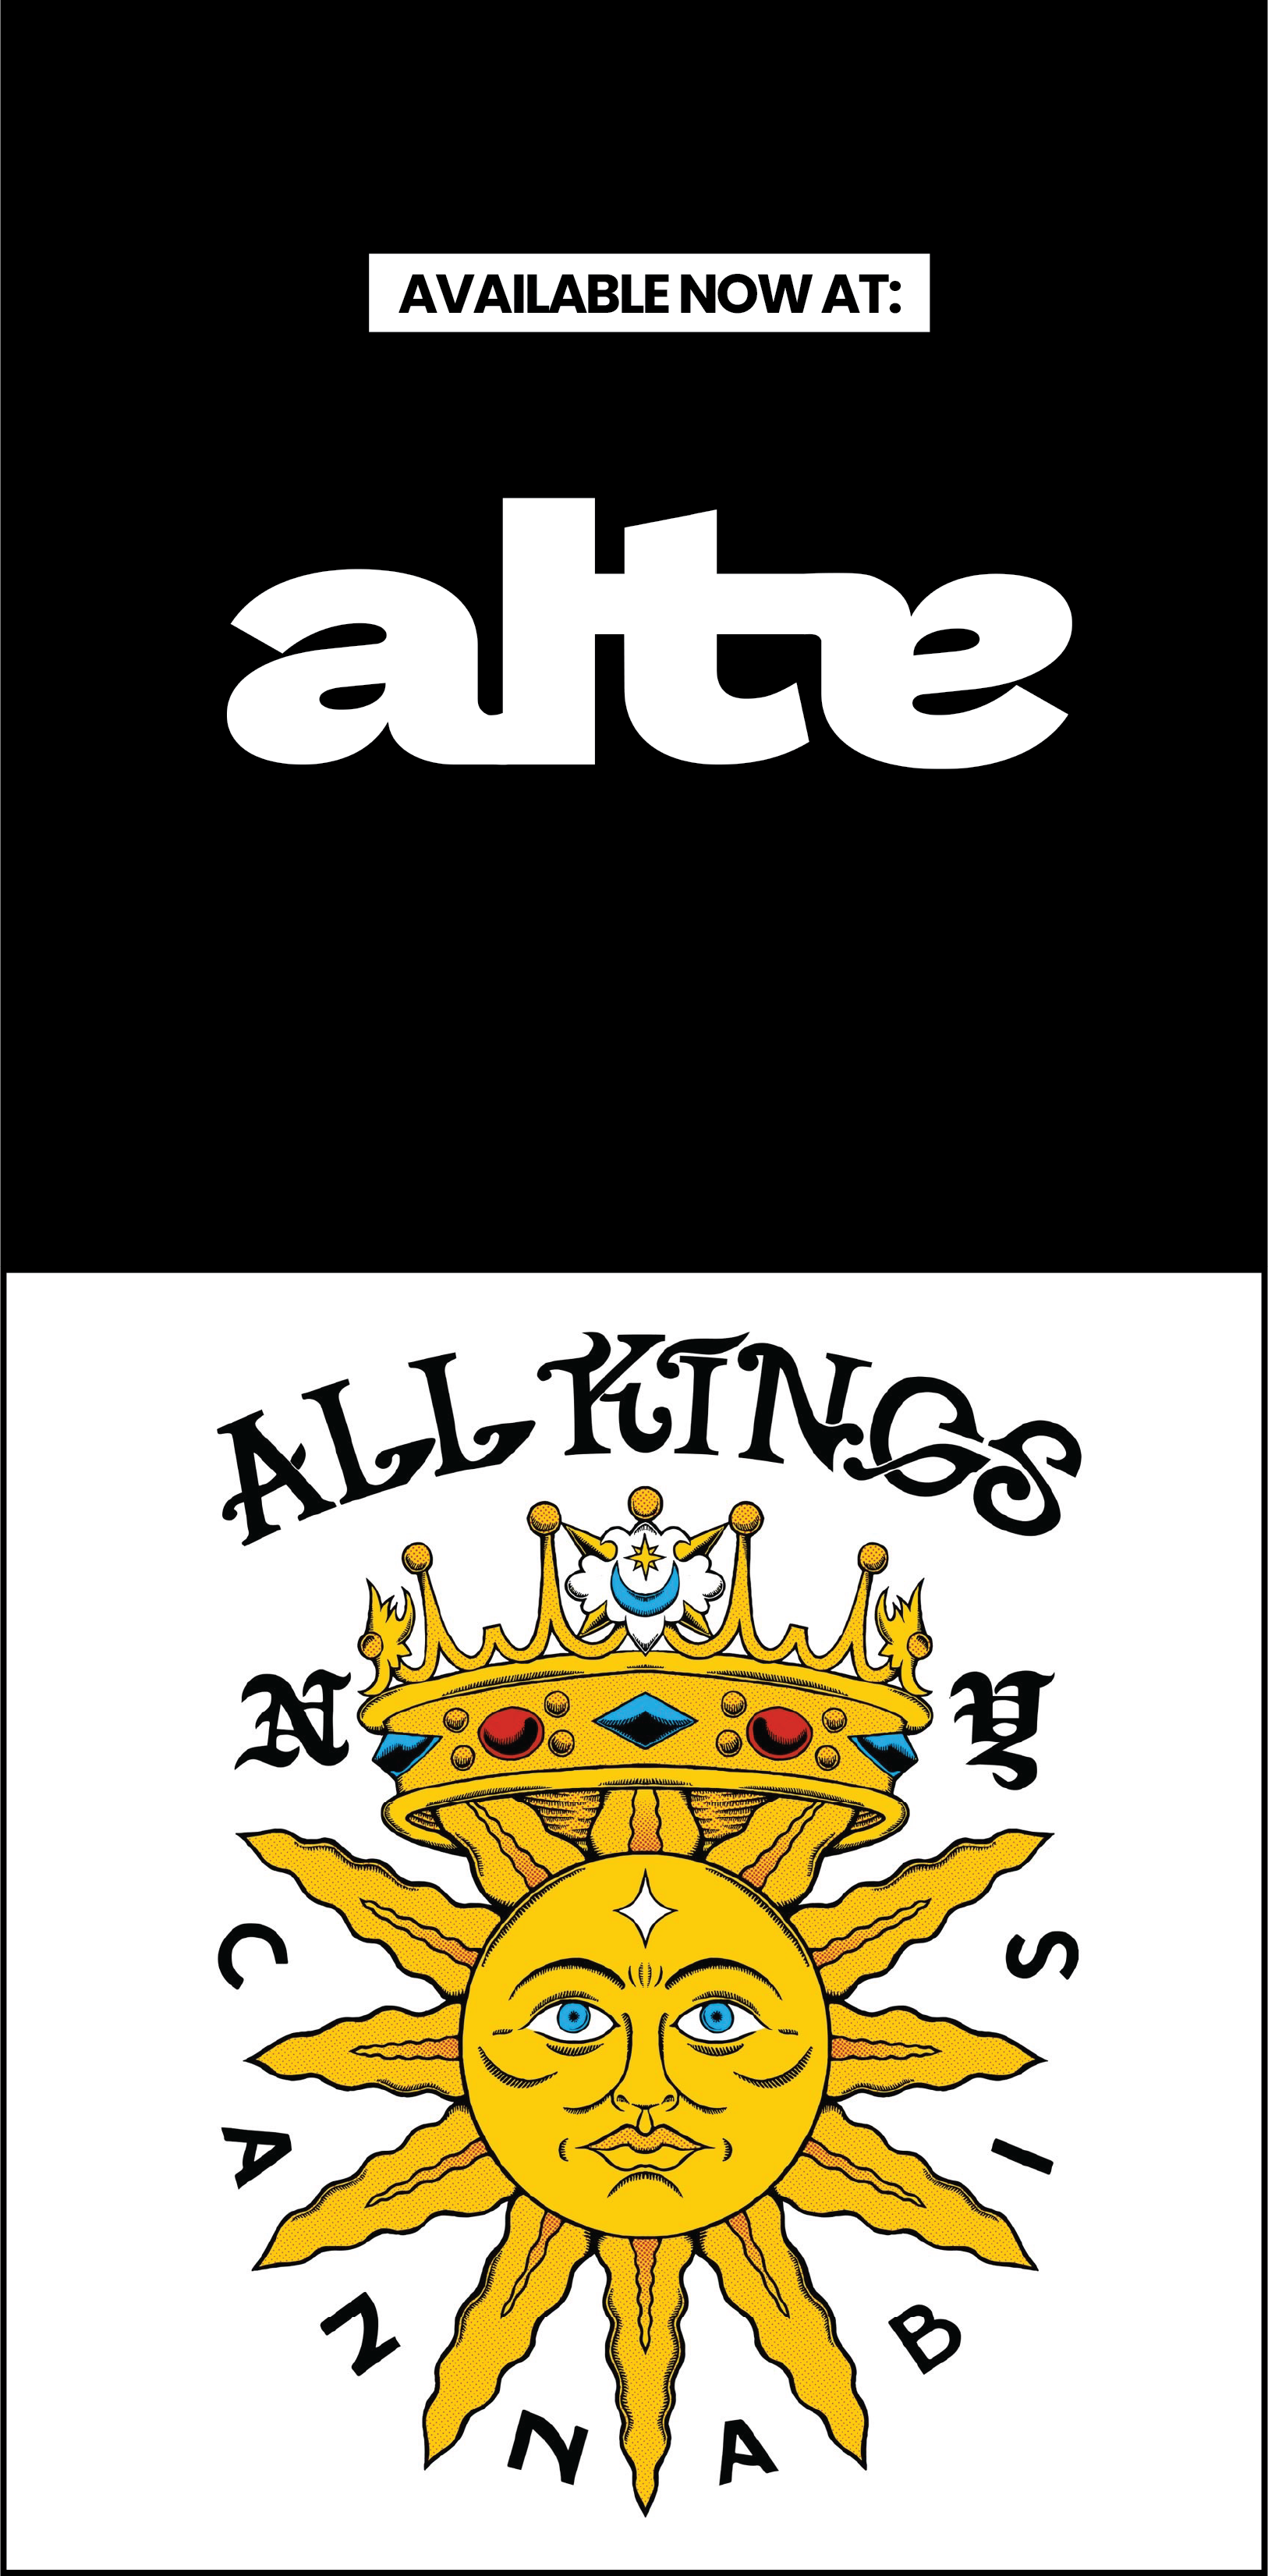 Welcoming ALL KINGS to Our Shelves: Elevating Local NYC Brands with ALTE Vendor Programs